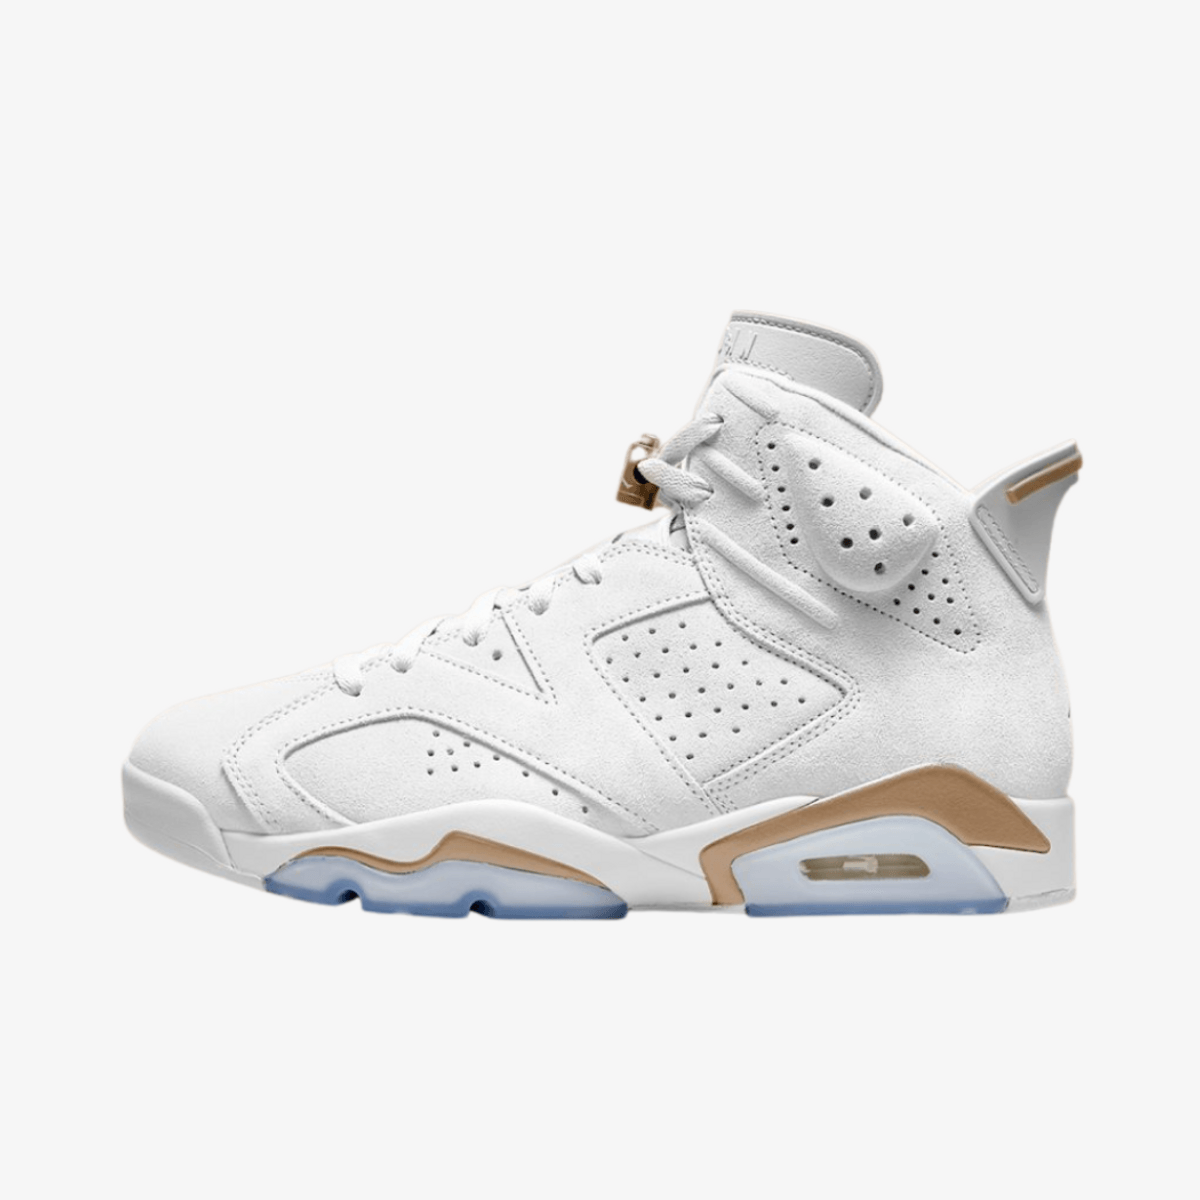 The Summer Of 2023 Will Bring Forth The Air Jordan 6 Craft